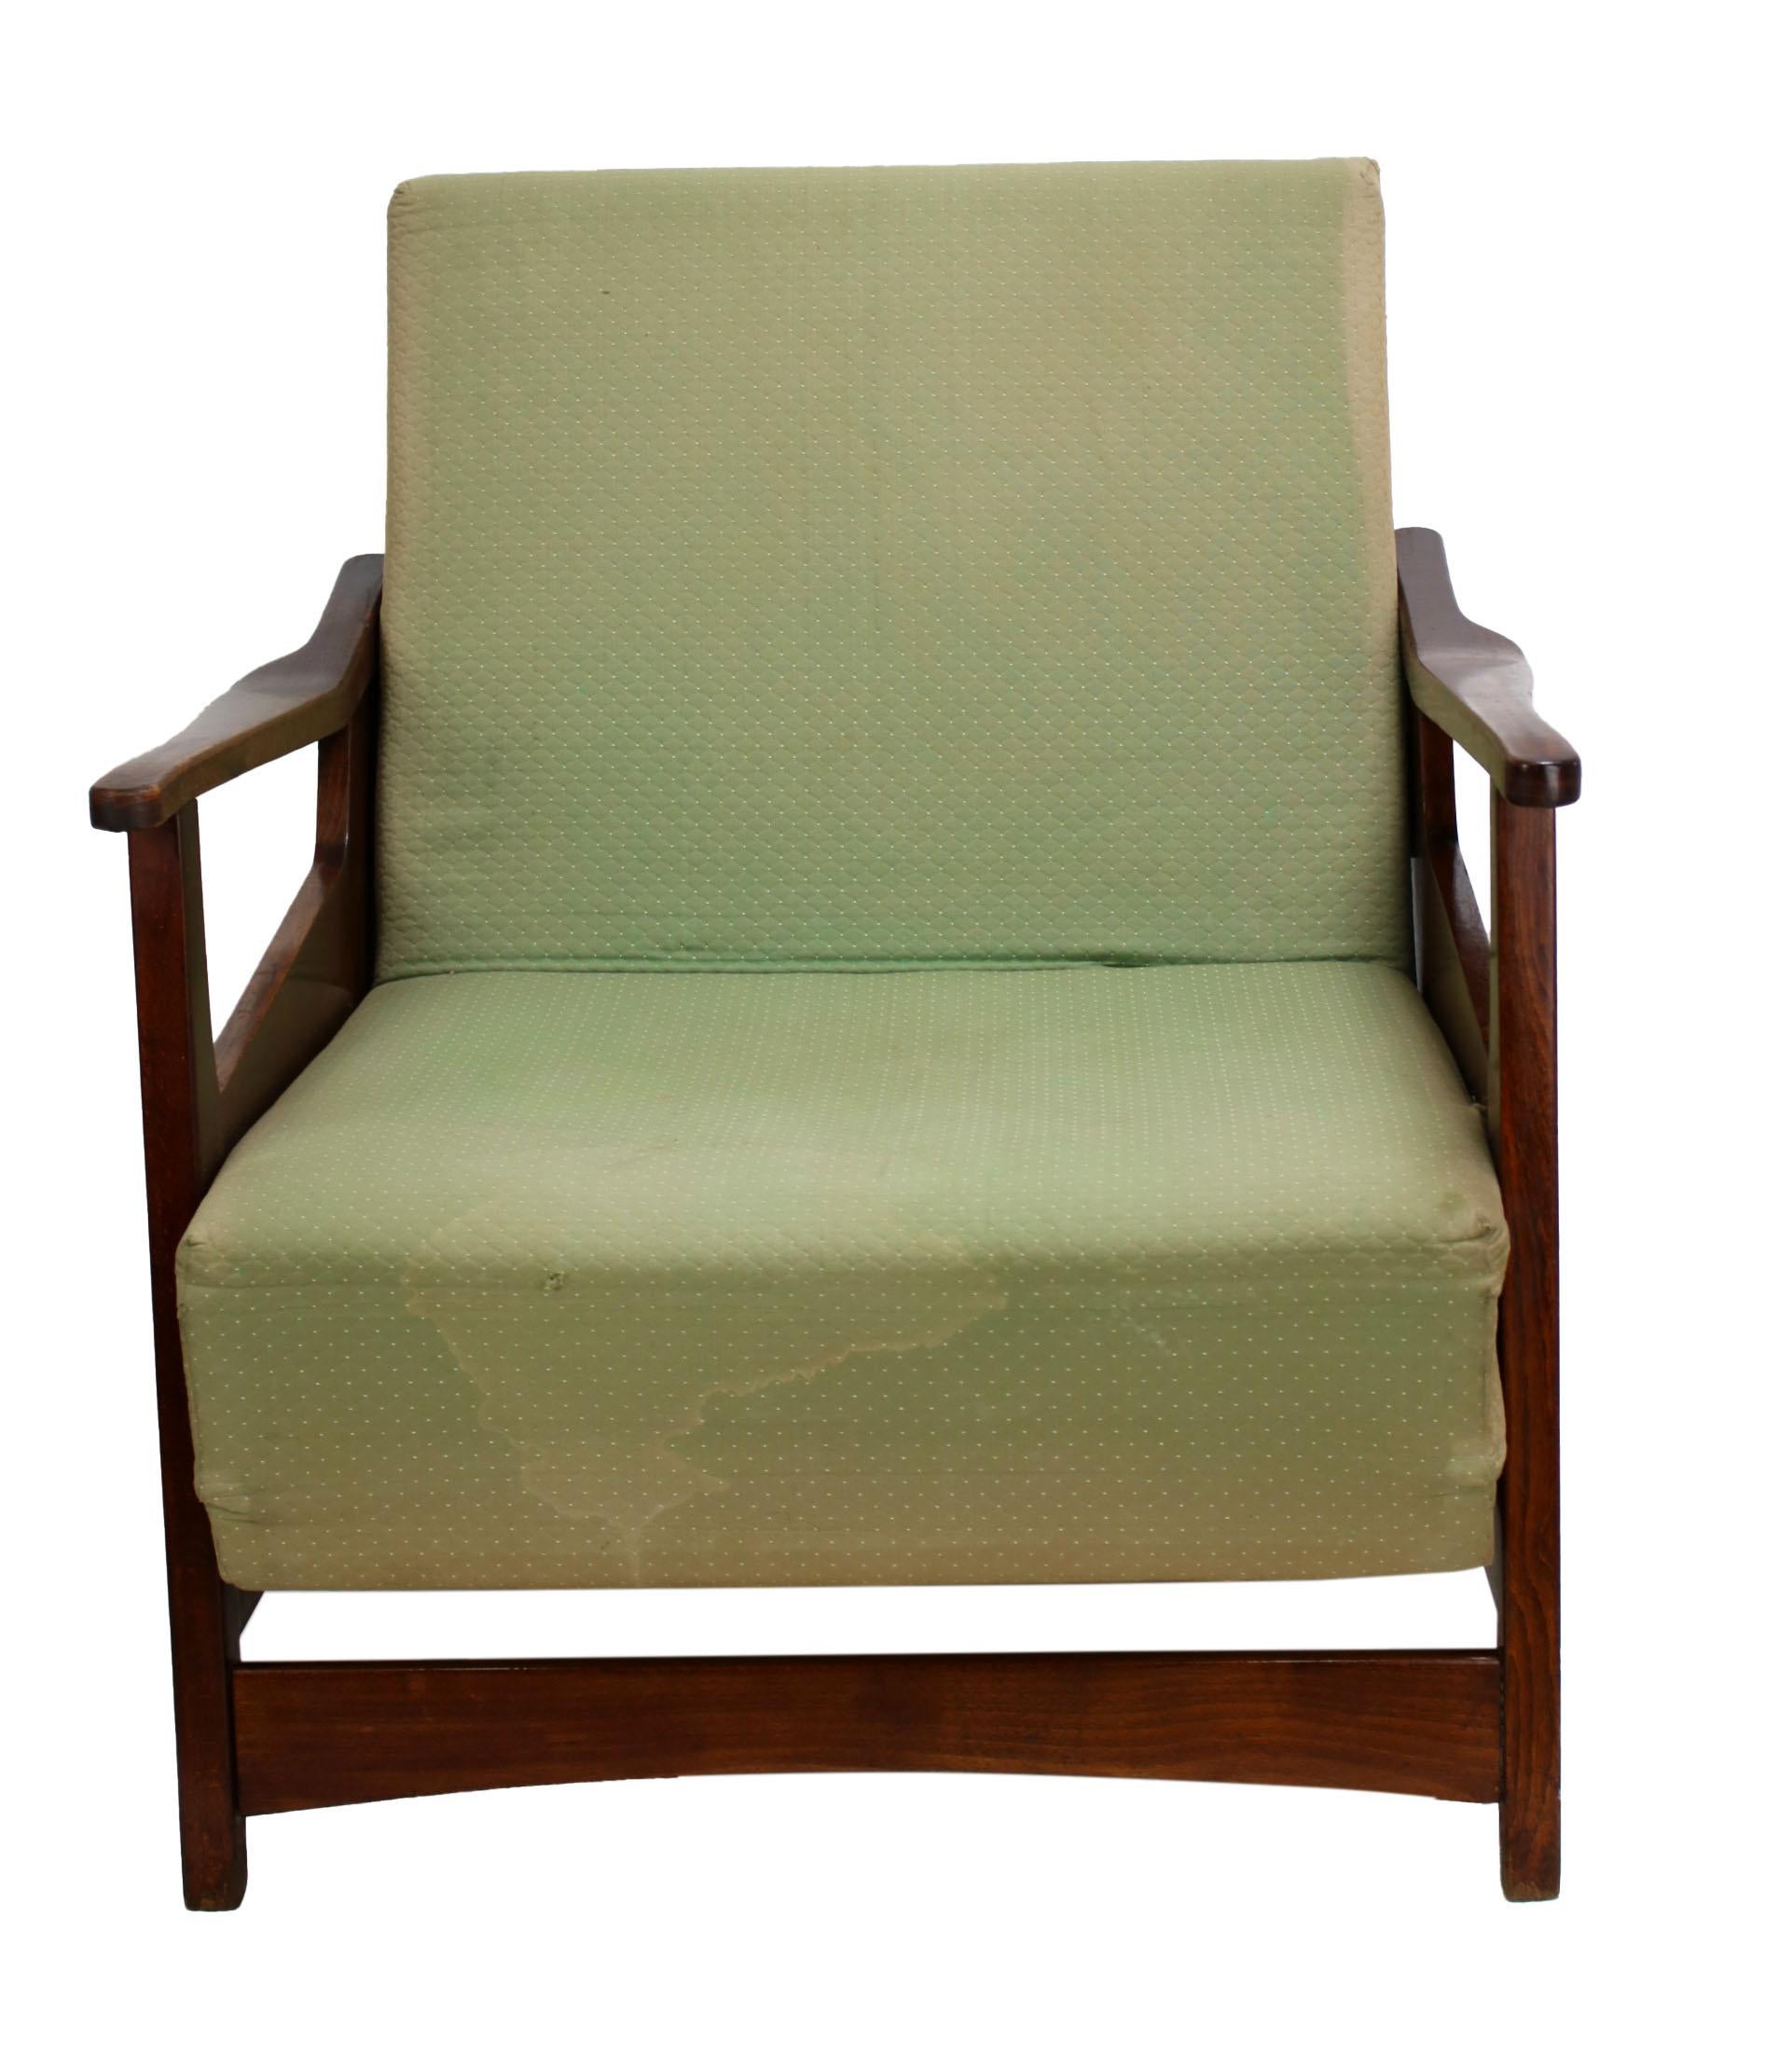 Mid-Century Modern Armchair, Convertible, Mid 20th Century For Sale